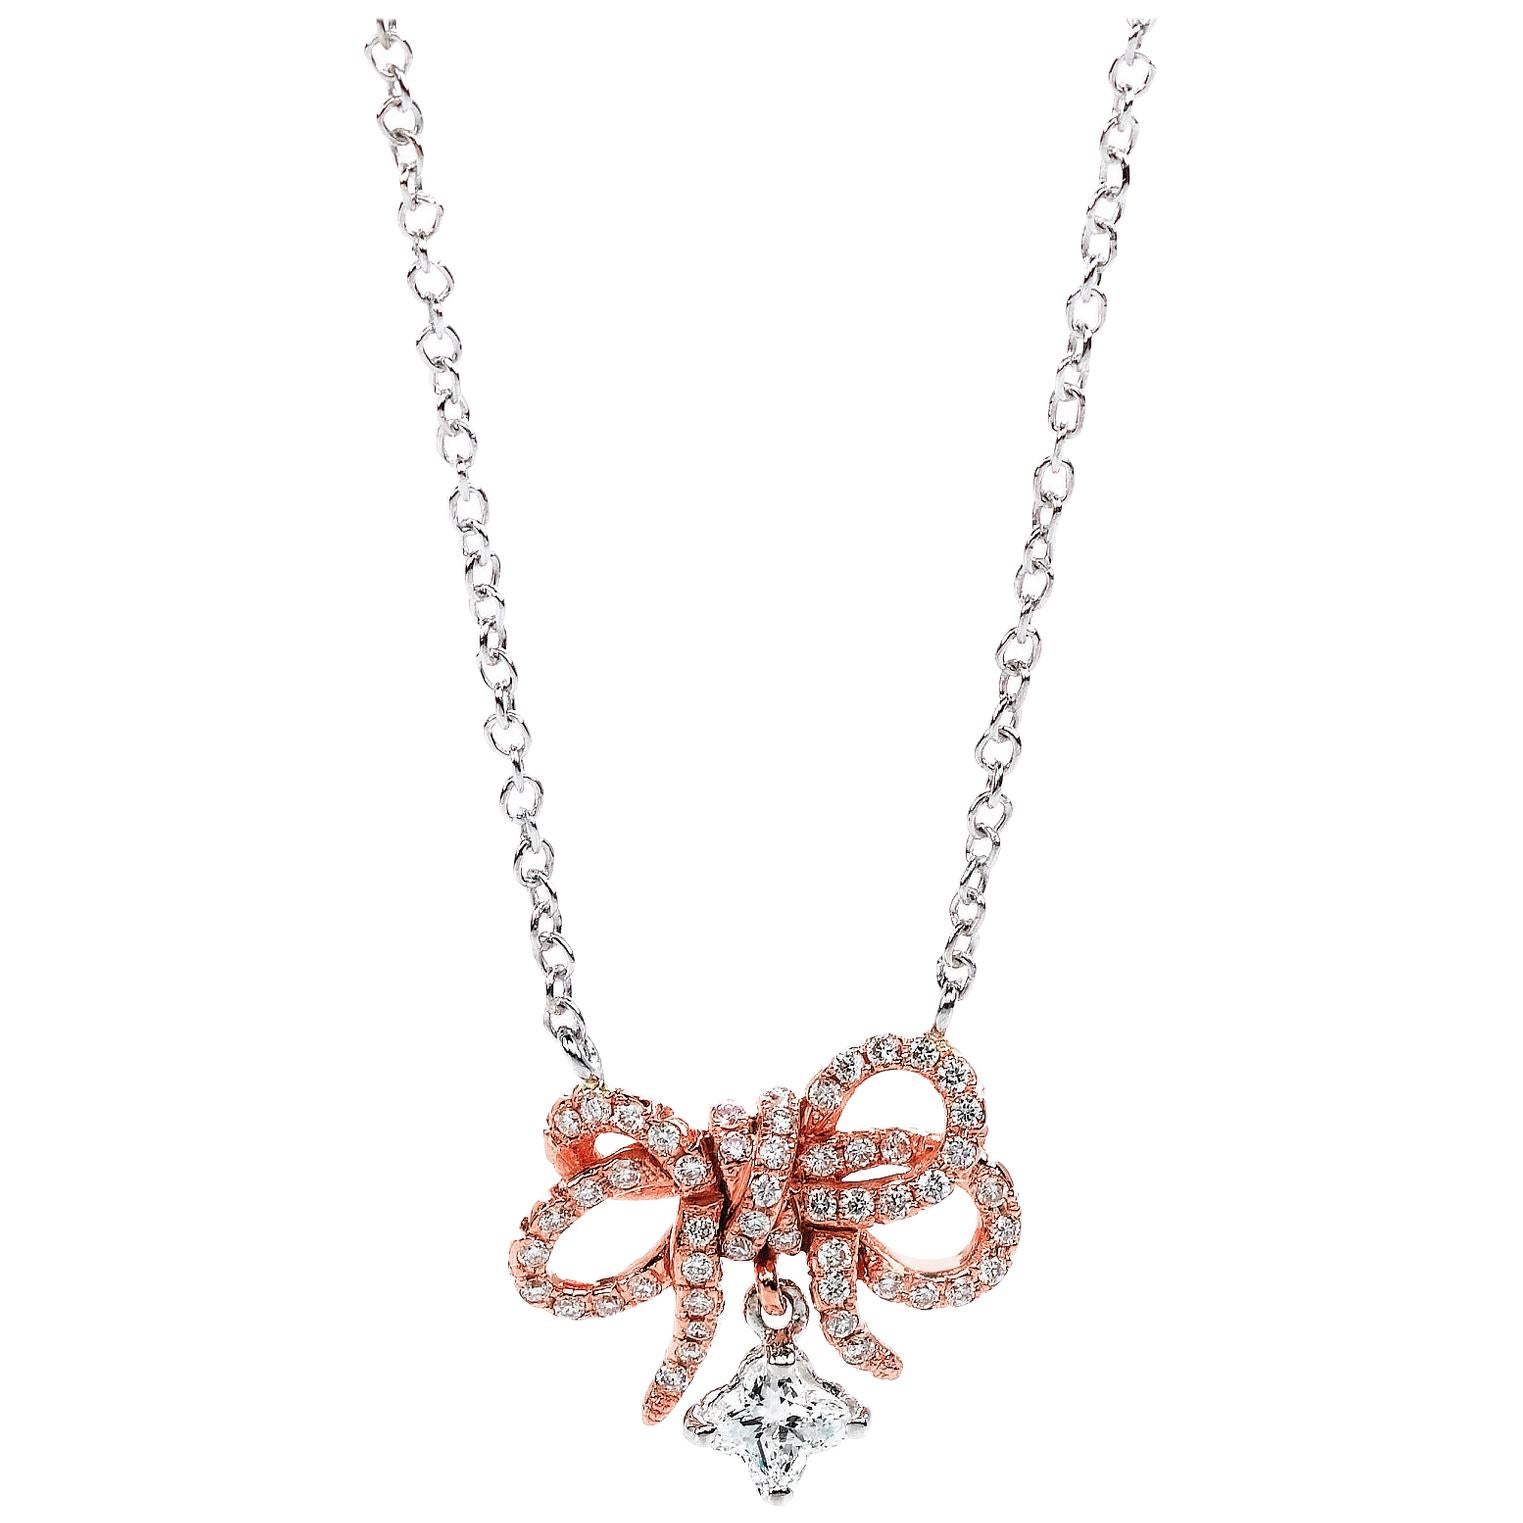 18 Karat White and Rose Gold Bouquet Bow Diamond Flower Necklac 0.46 Carat Total